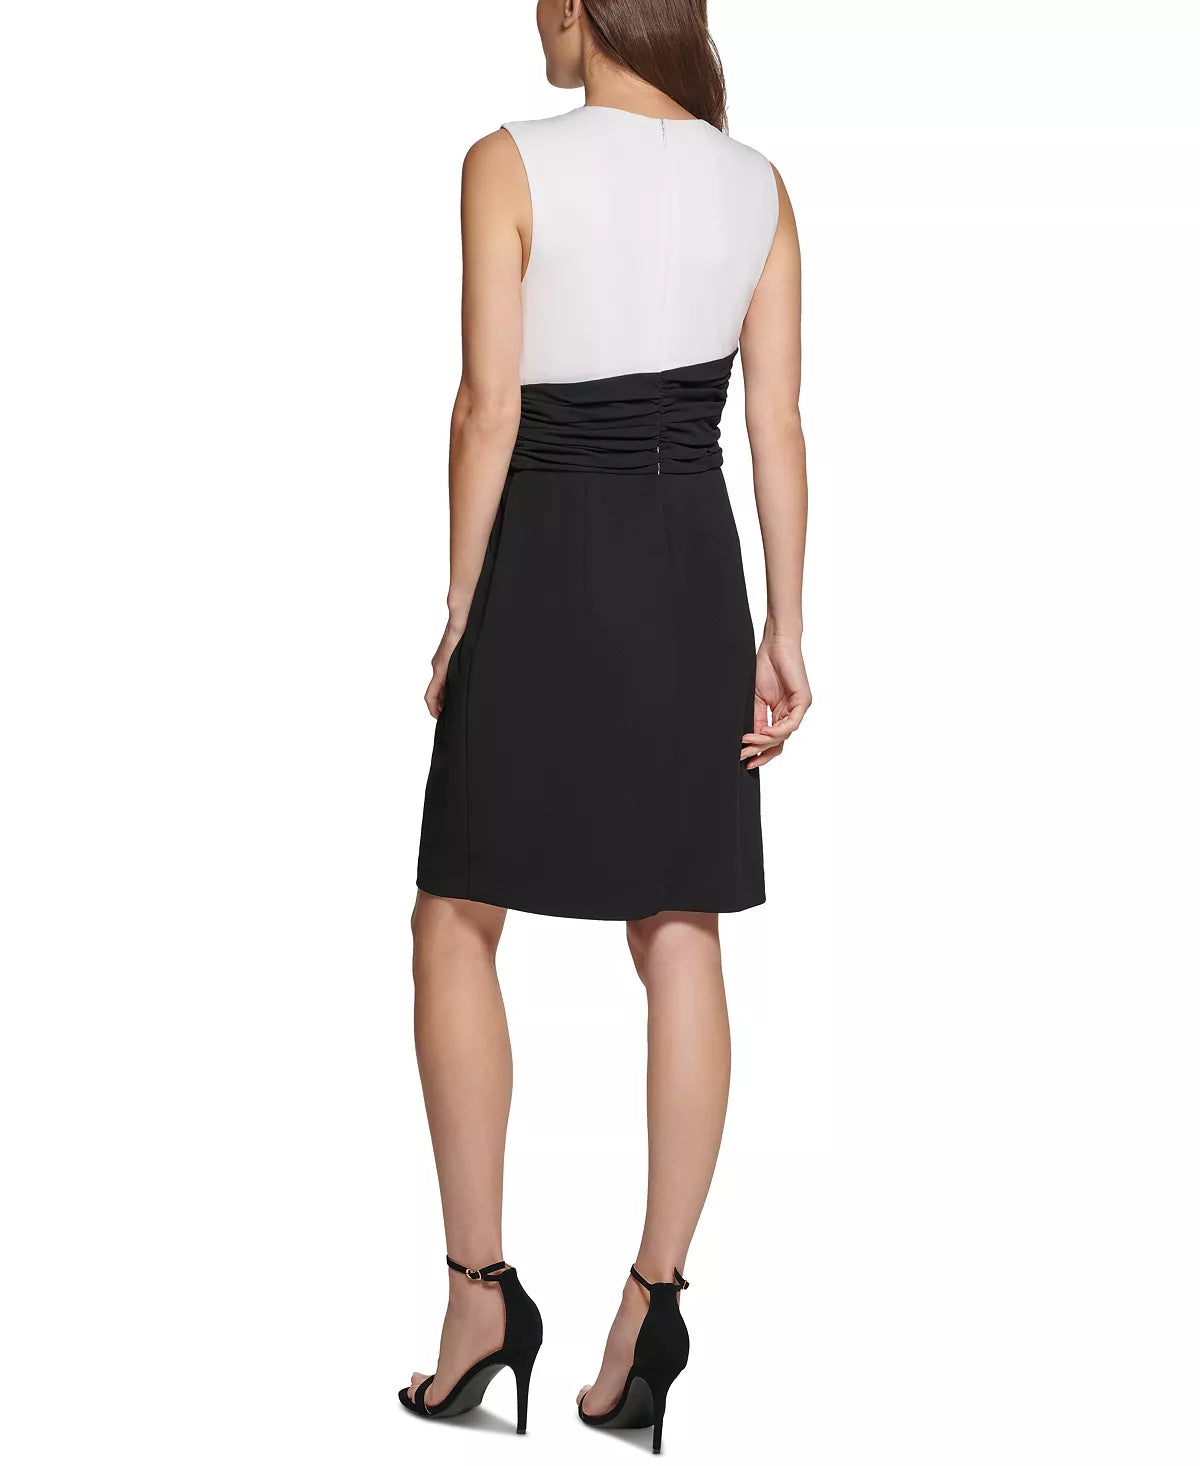 DKNY Colorblocked Ruched Sheath Dress